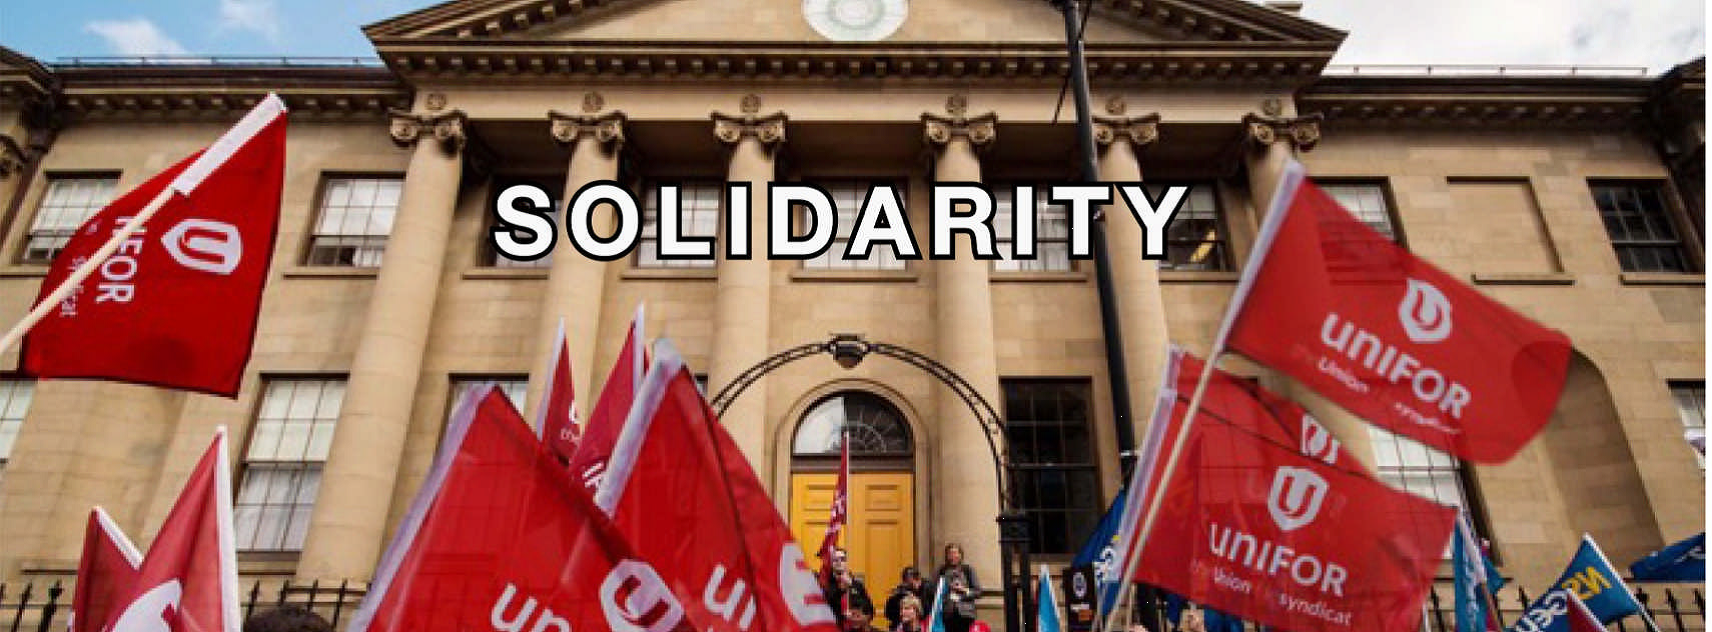 Unifor flags waving with the word Solidarity over the image